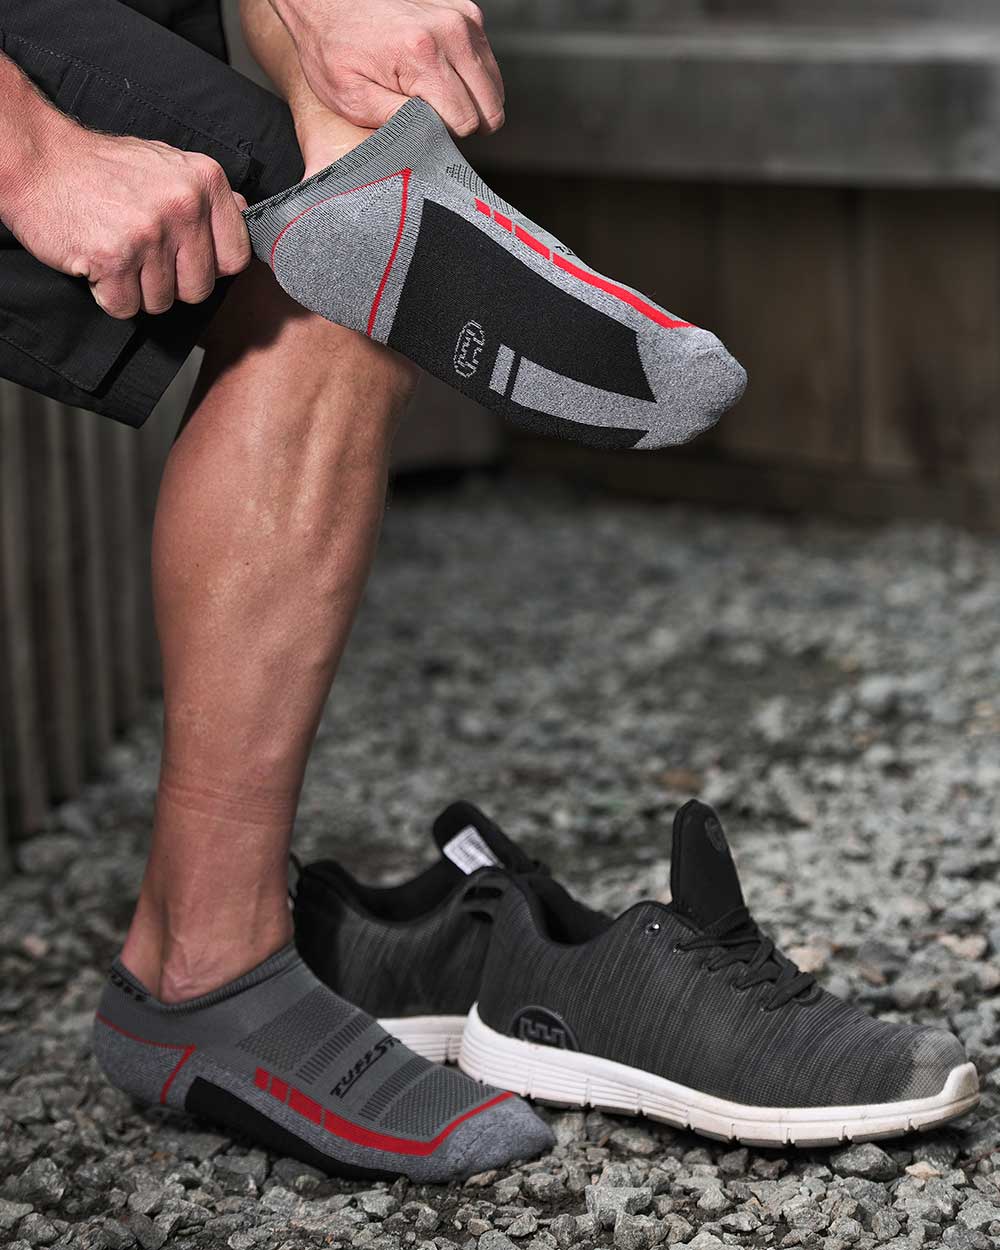 Trainer socks low cut work with safety training shoes The TuffStuff Elite Low Cut Socks in Grey and Red